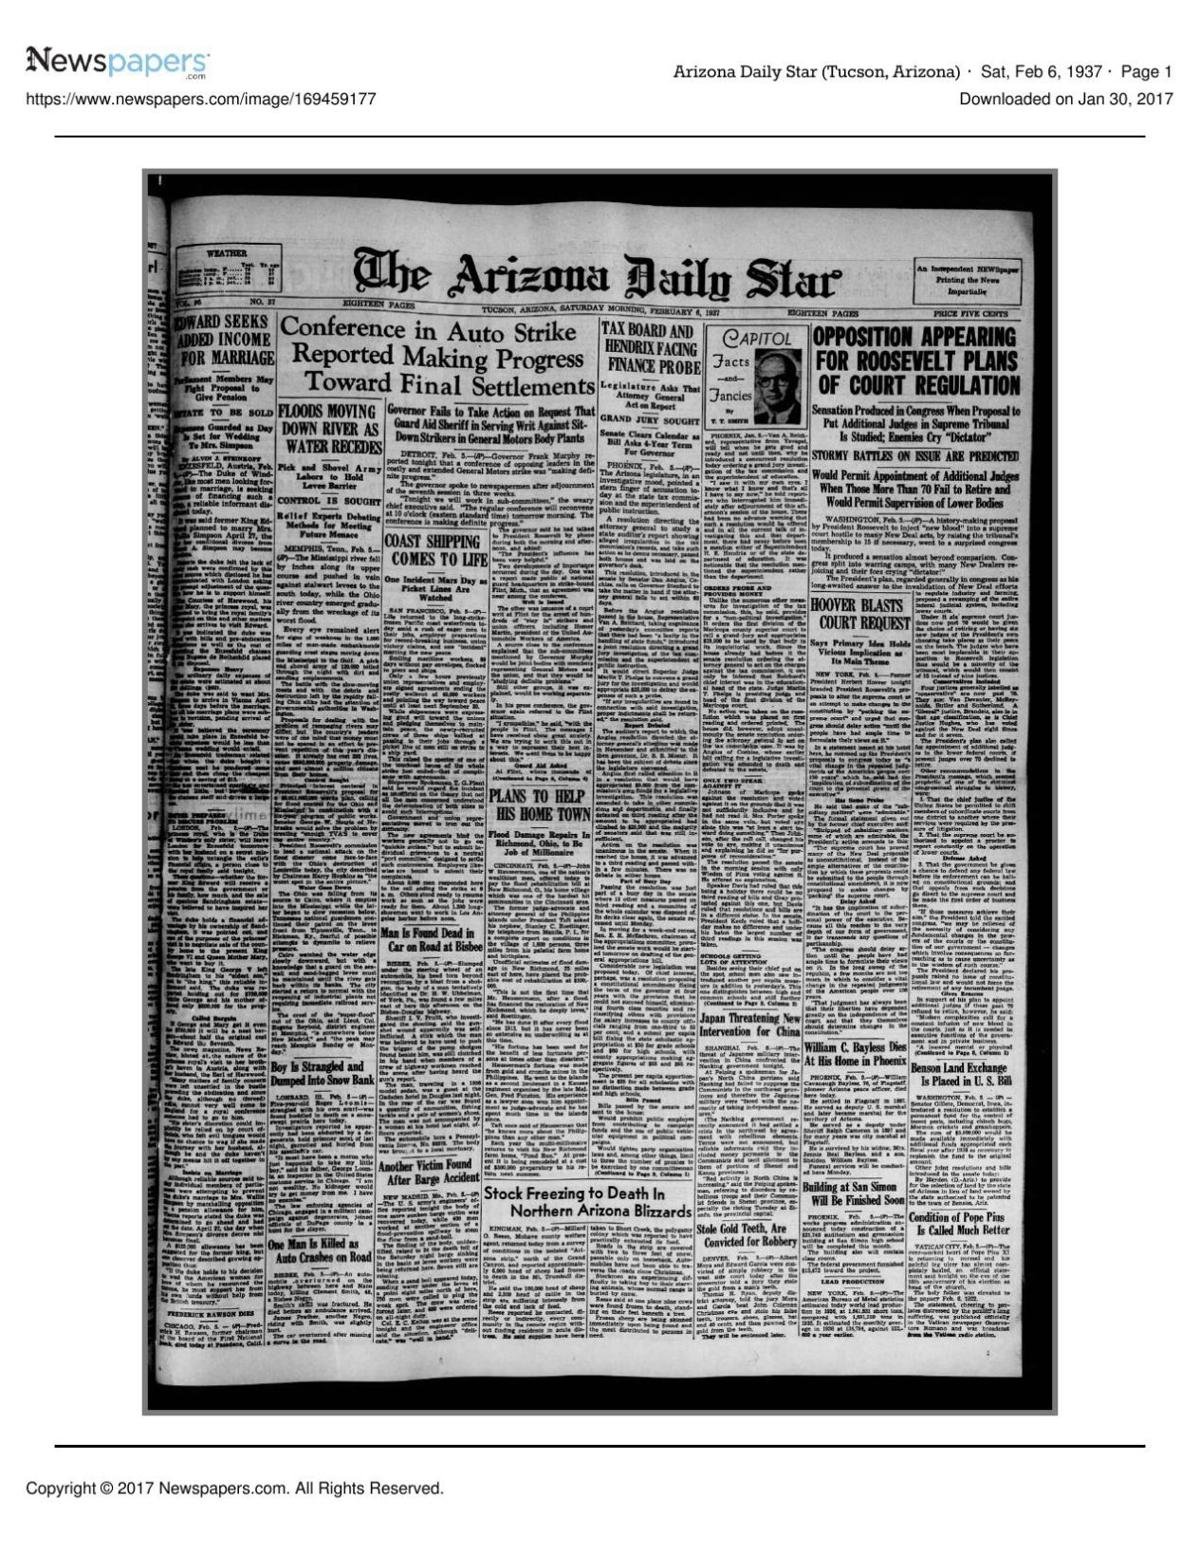 Arizona Daily Star front page Feb. 6, 1937